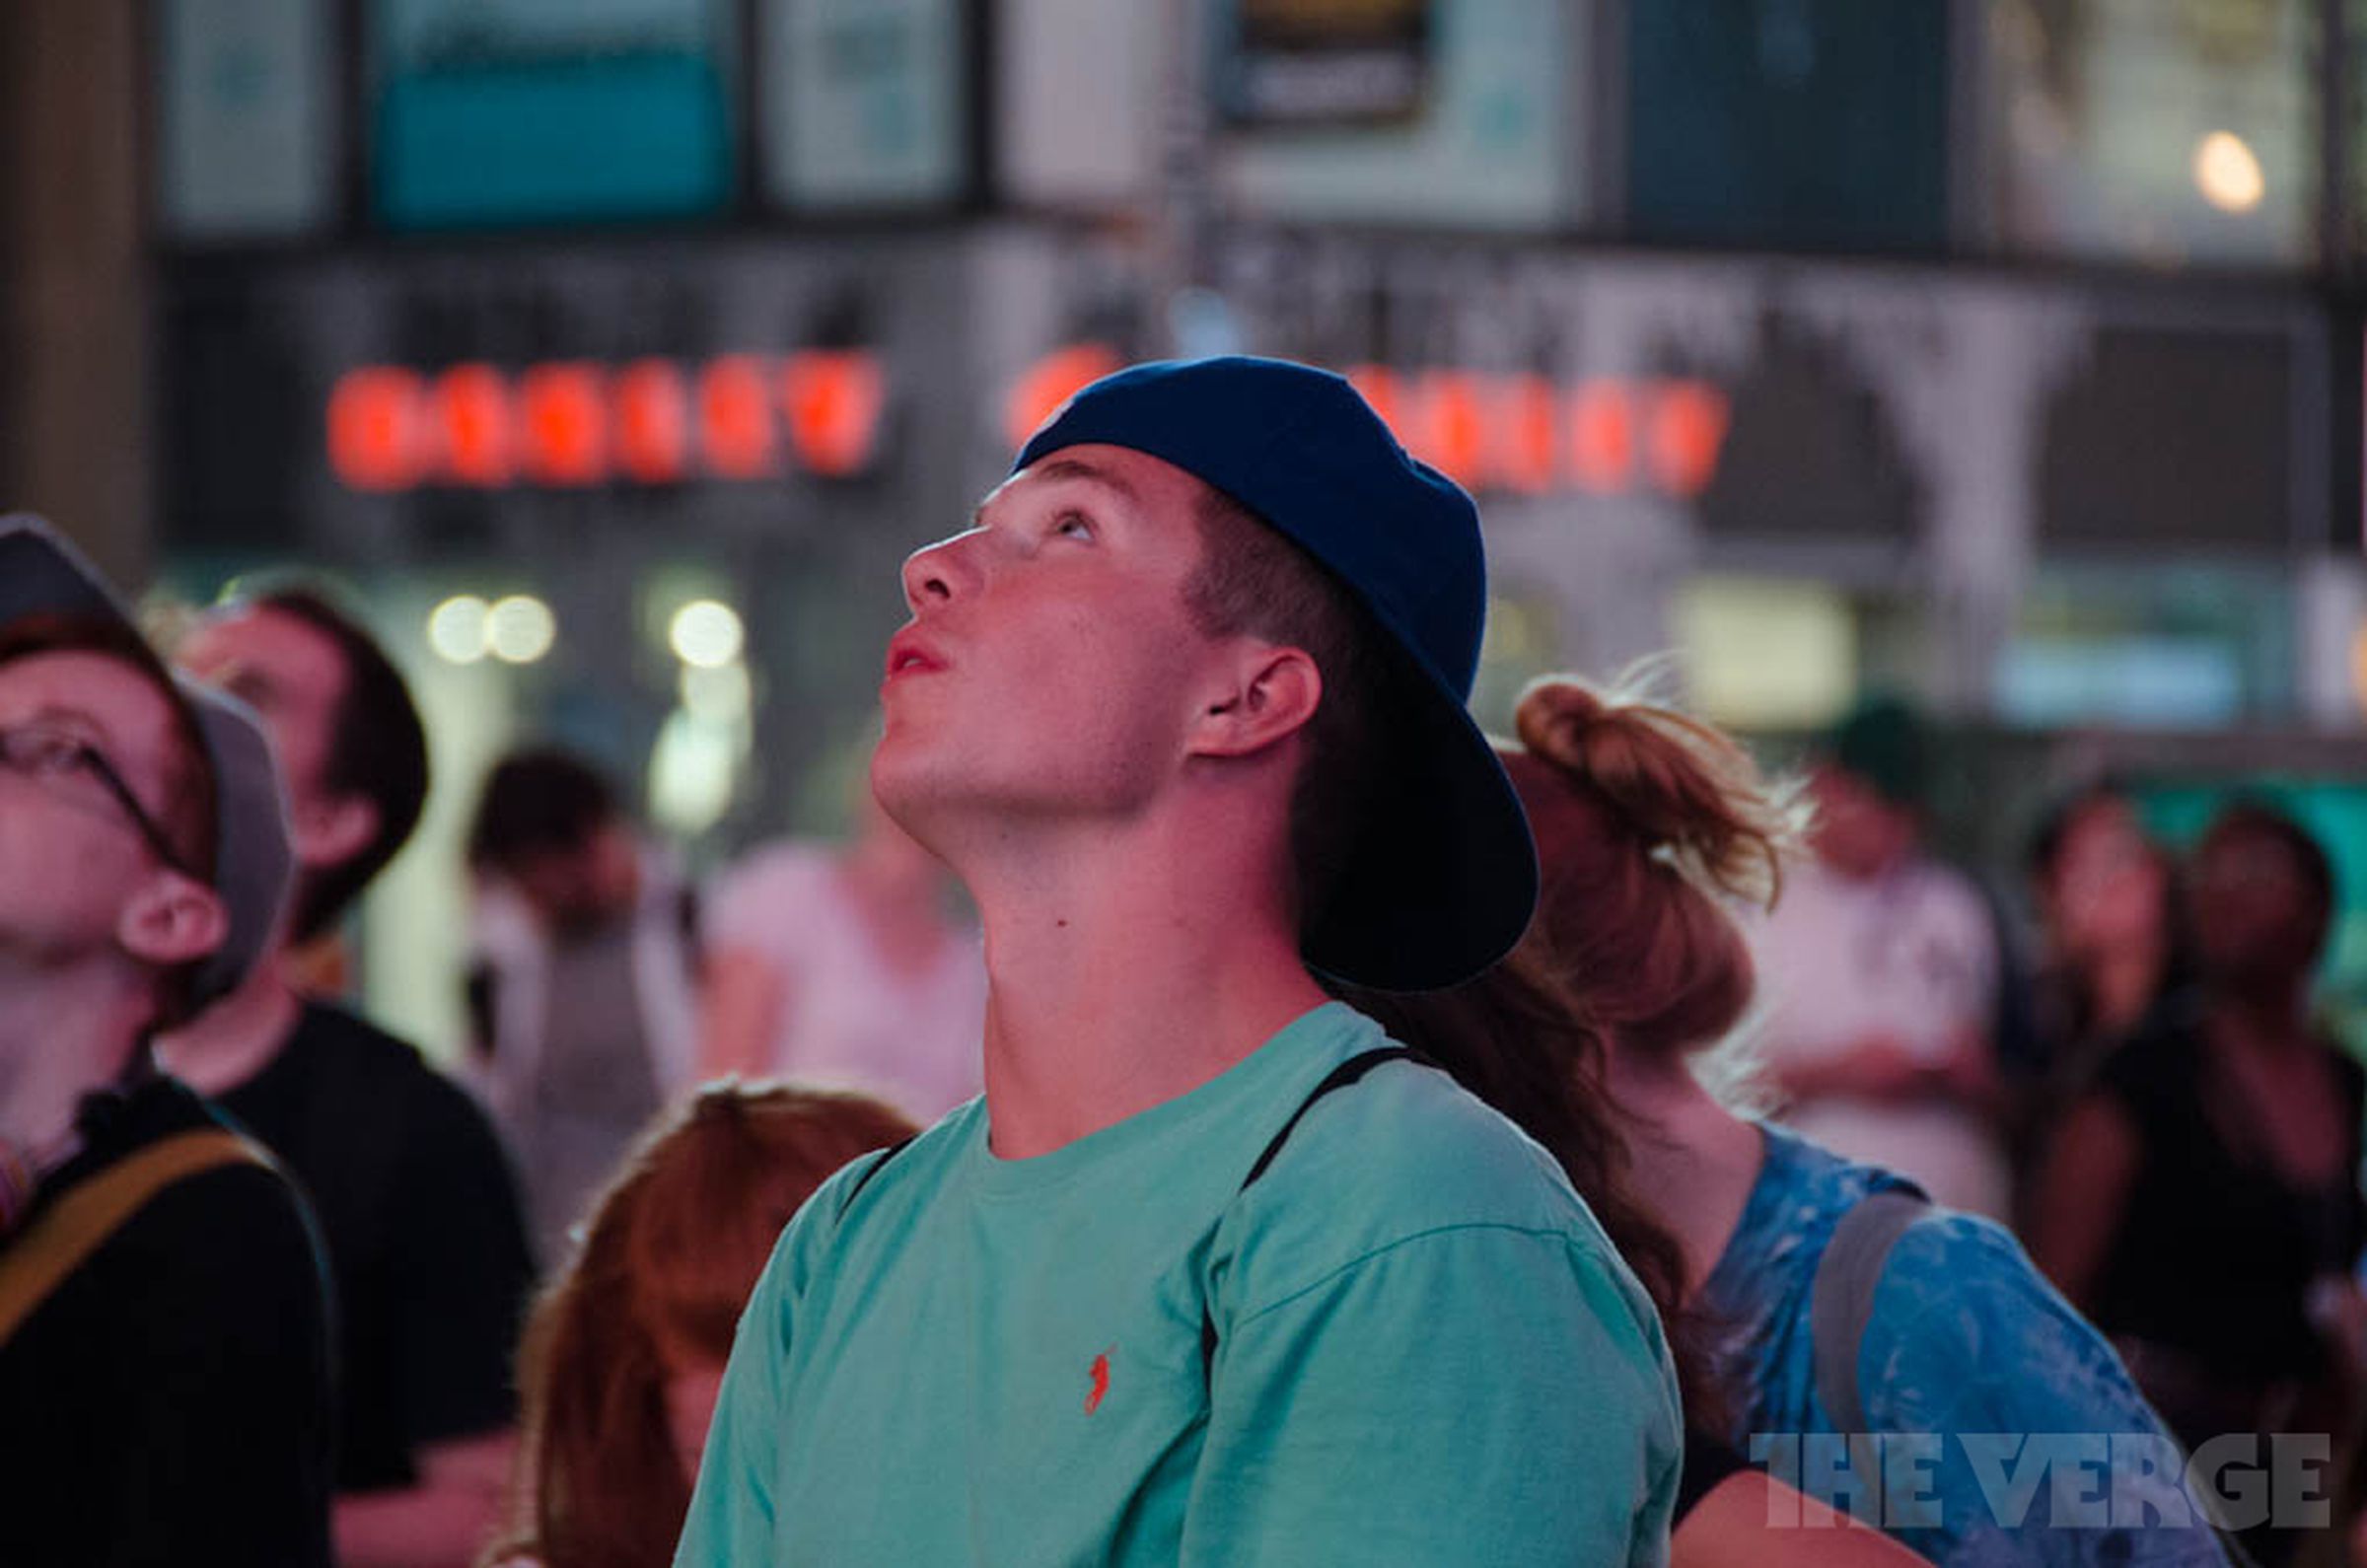 Times Square crowd reacts to the Curiosity landing: in pictures